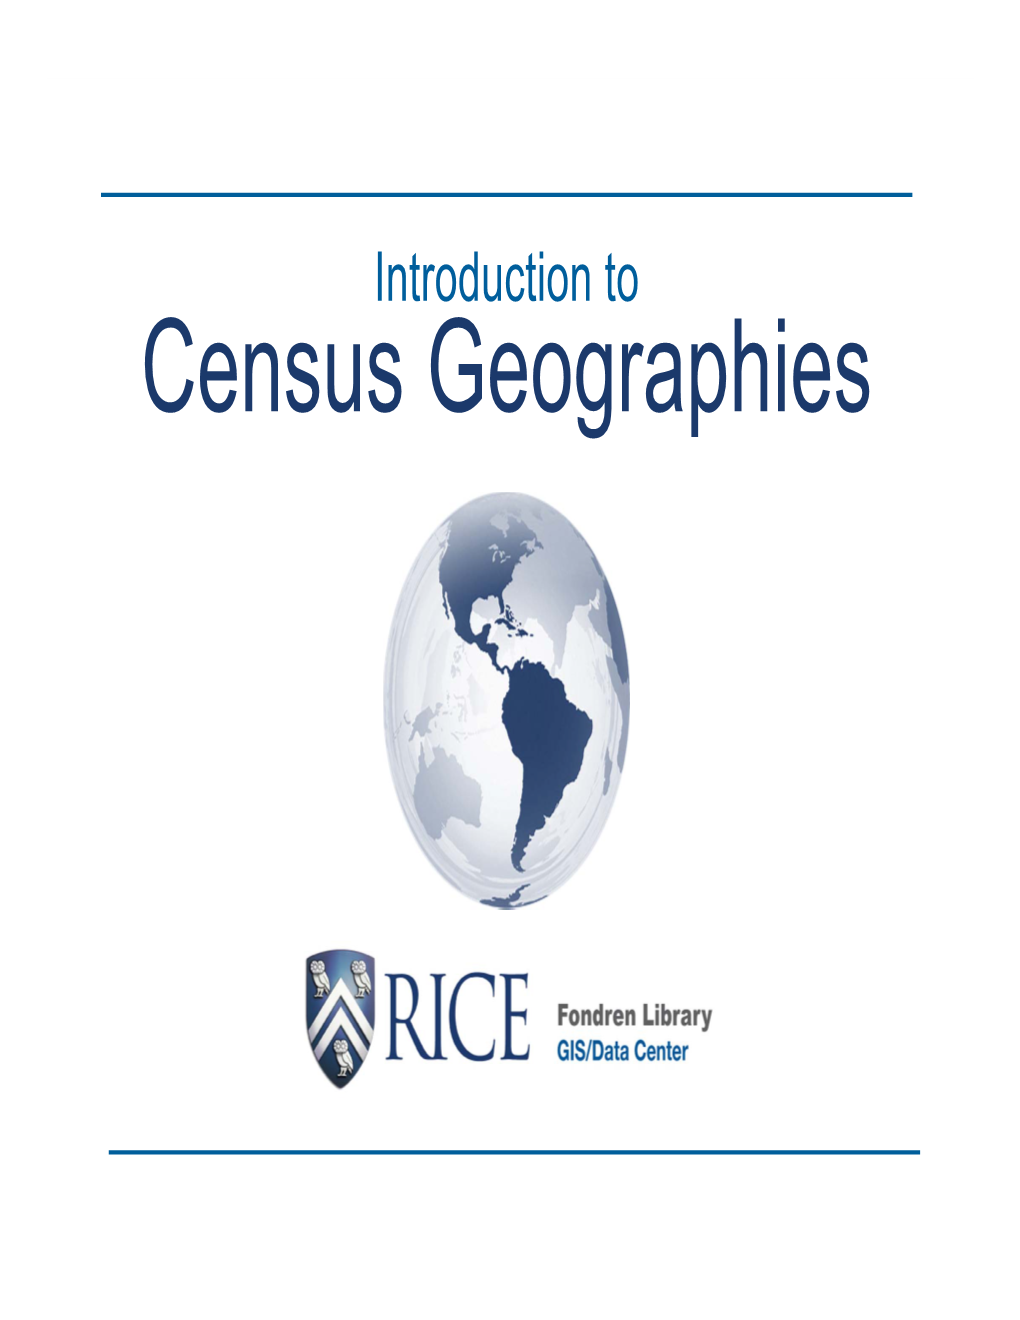 Census Geographies Fundamentals of Census Geographies